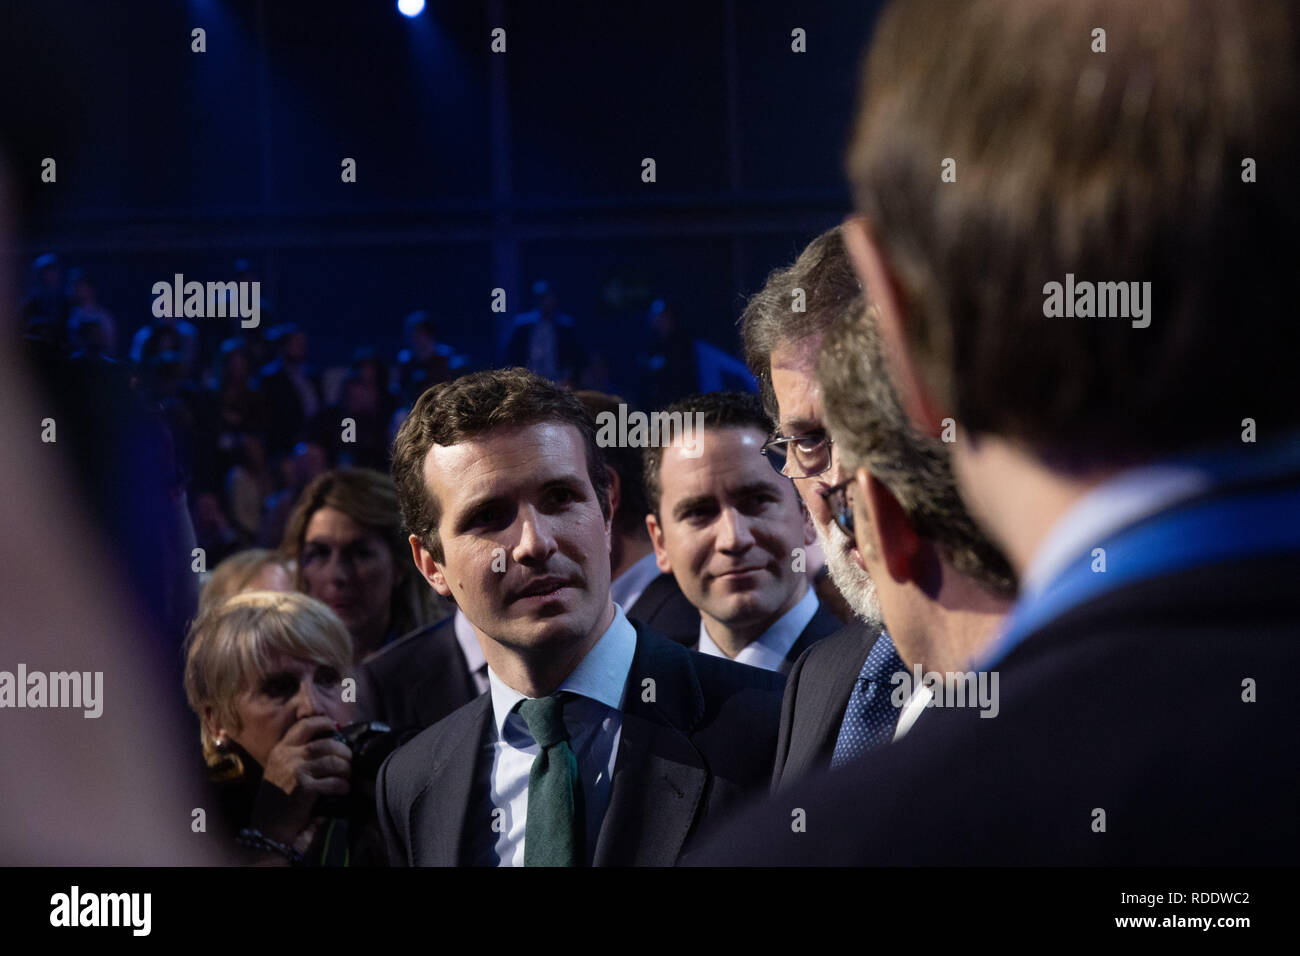 January 18, 2019 - Madrid, Spain - Pablo Casado greeting members of his party. The PP celebrates its national convention to establish the main lines of its electoral program for the three elections scheduled for May 26 and are key to gauge the leadership of the popular president, Pablo Casado. (Credit Image: © Jesus Hellin/ZUMA Wire) Stock Photo